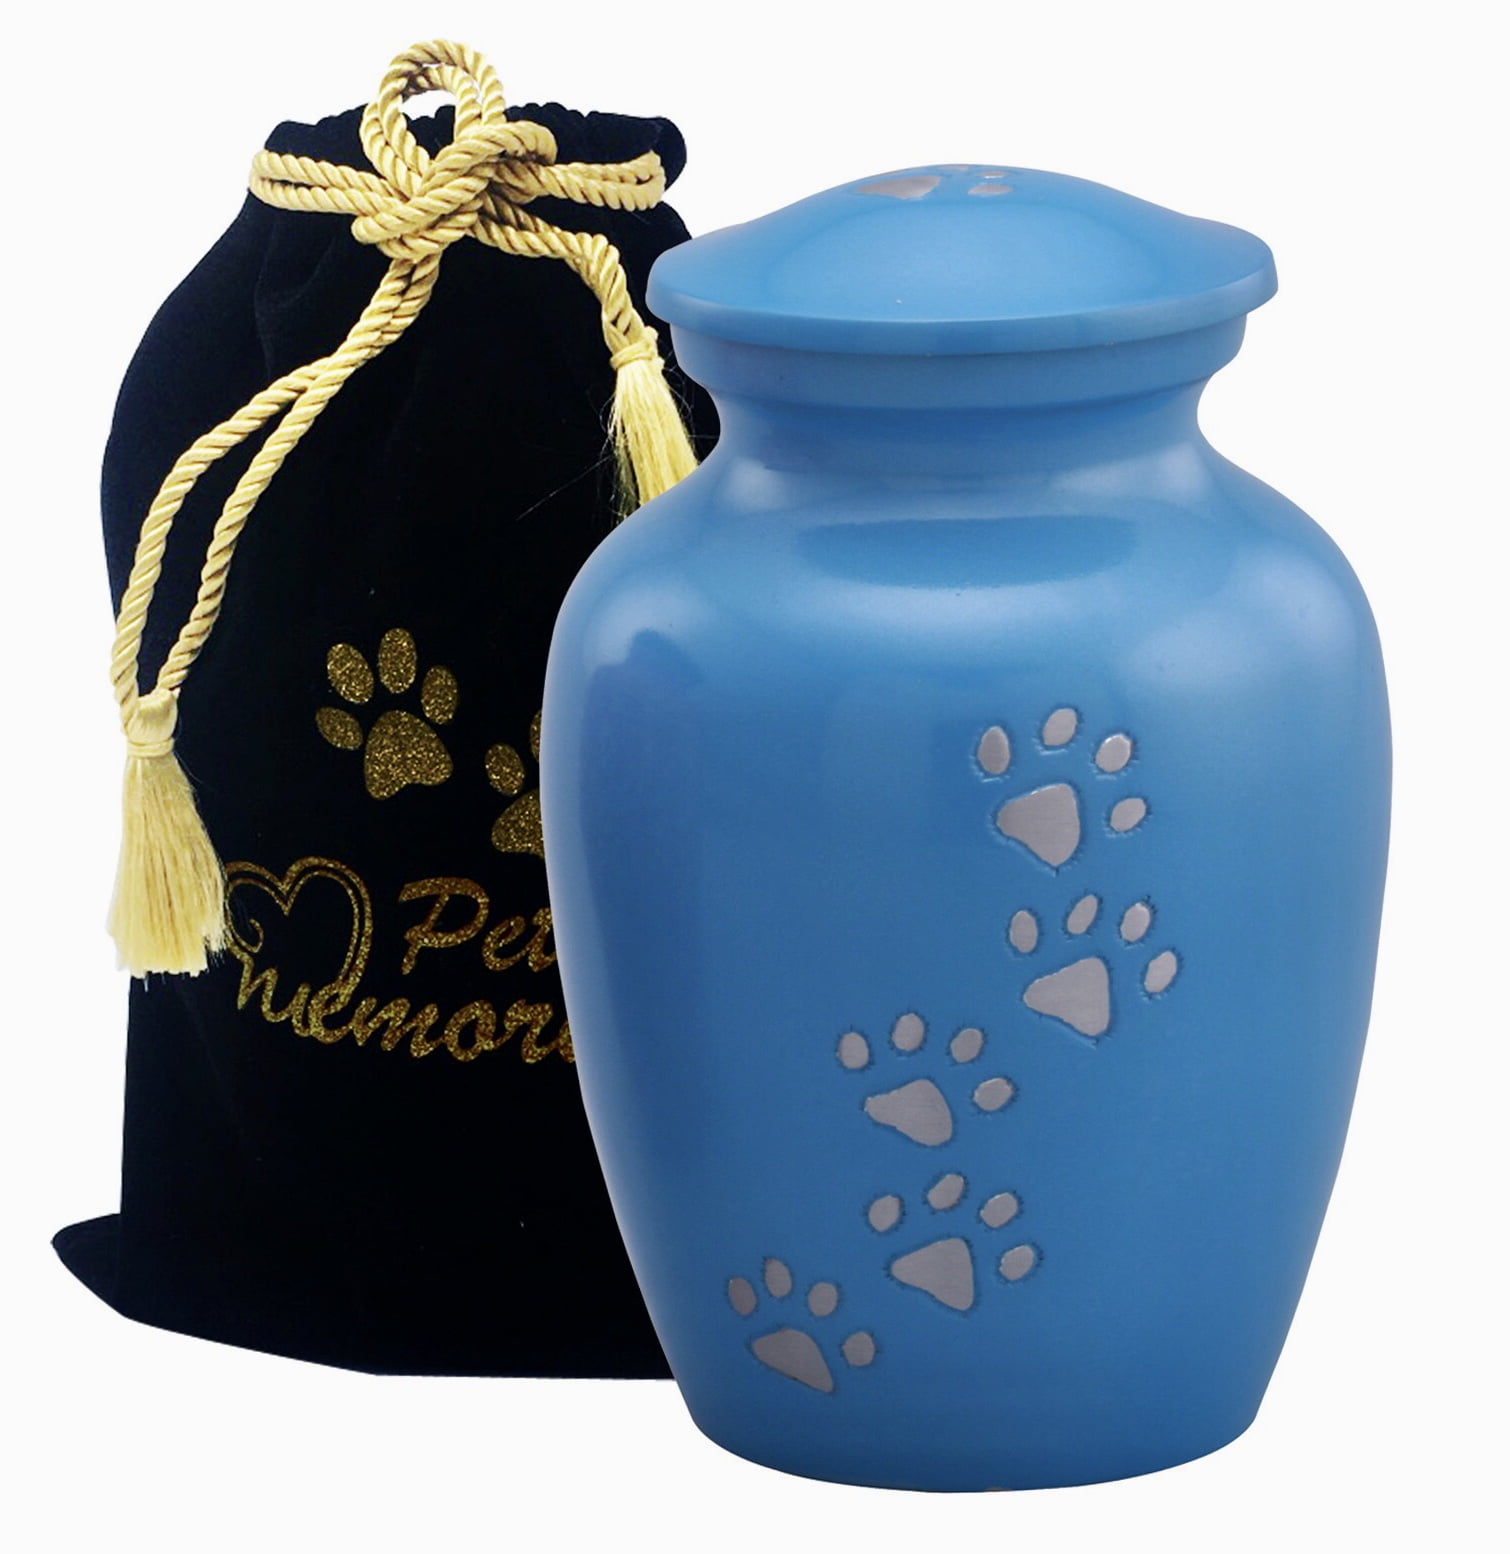 Pet Cremation Urn For Ashes Funeral Memorial Pet Wood urn paw print 